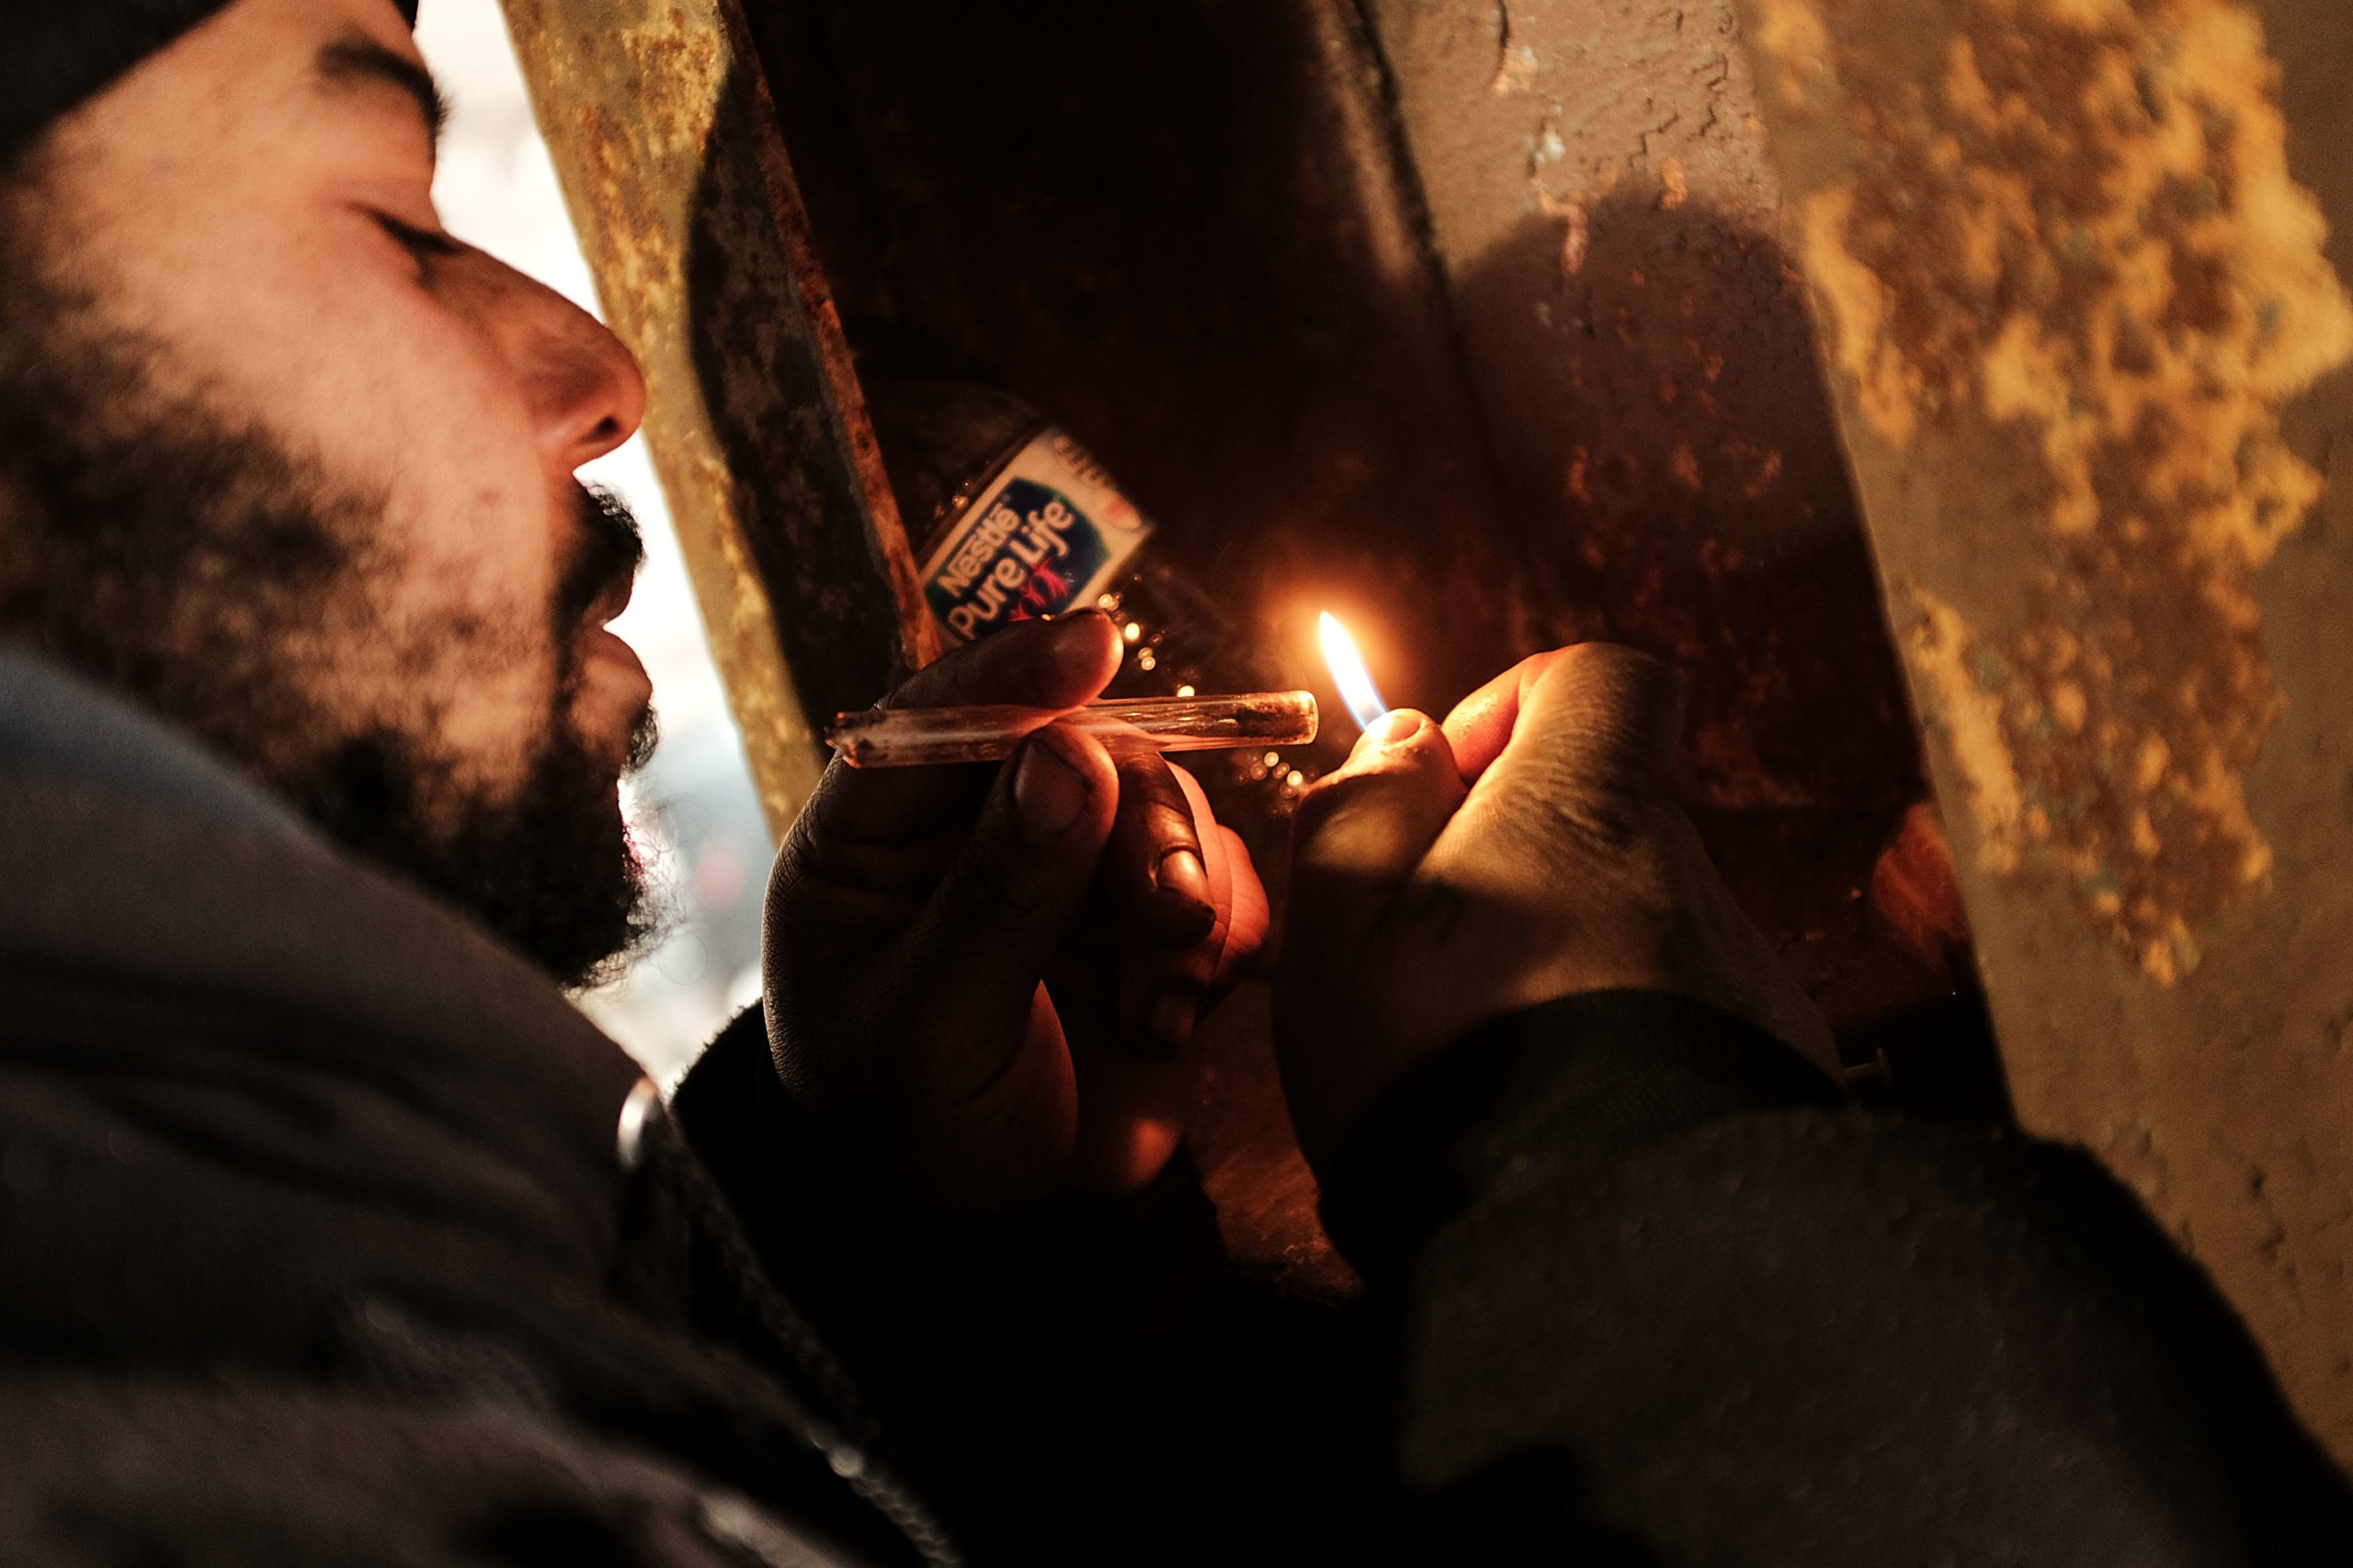 A man smokes crack under a bridge where he lives with other addicts in the Kensington section which has become a hub for heroin use on January 24, 2018 in Philadelphia, Pennsylvania. Over 900 people died in 2016 in Philadelphia from opioid overdoses, a 30 percent increase from 2015. (Photo by Spencer Platt/Getty Images)